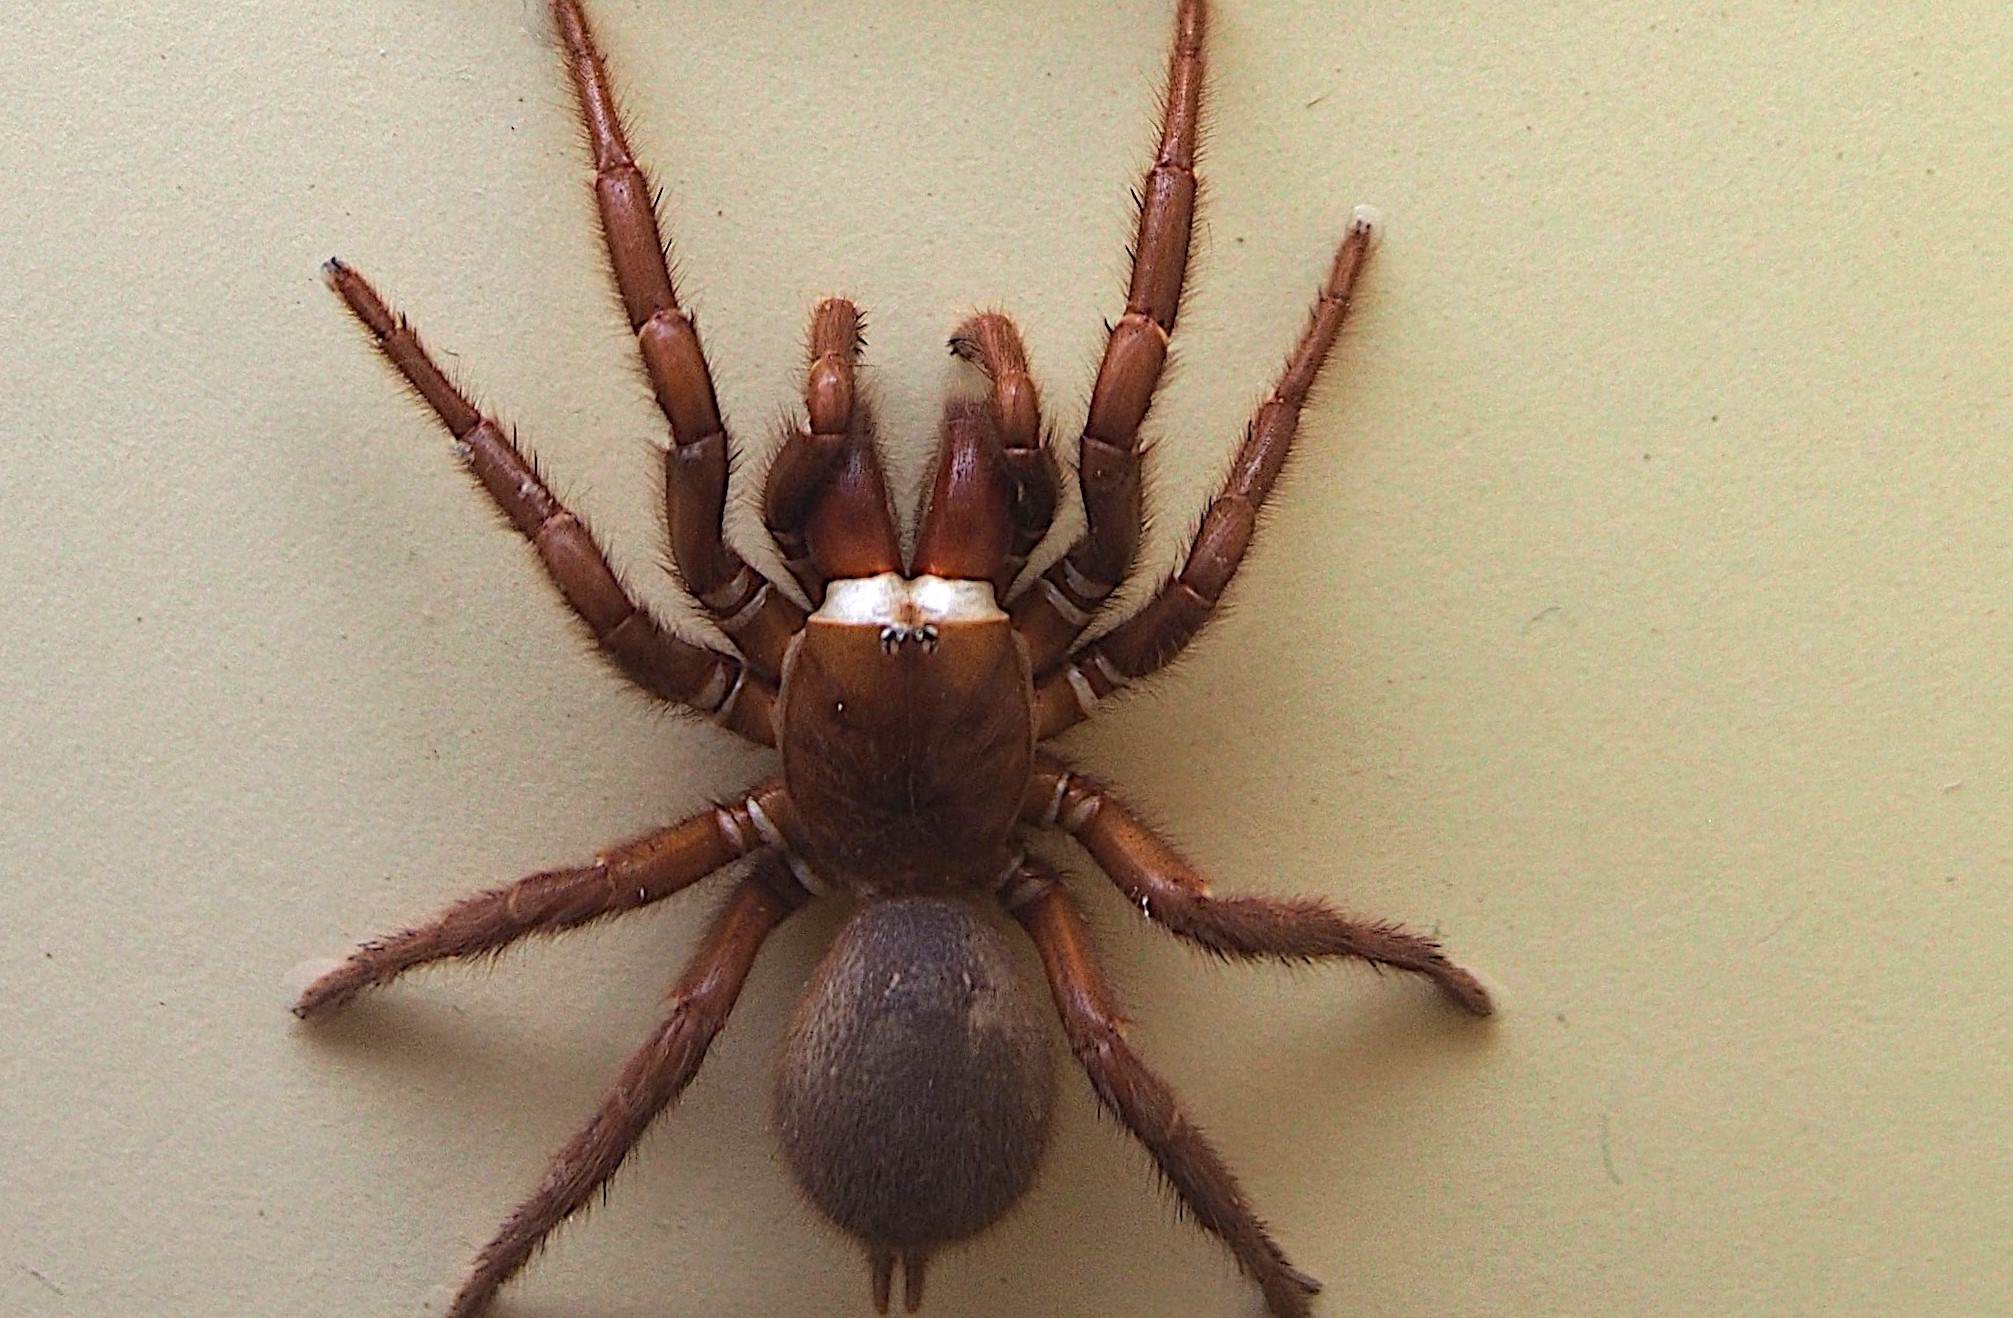 What's a funnel web spider and what are the most dangerous spiders in the  world? All you need to know